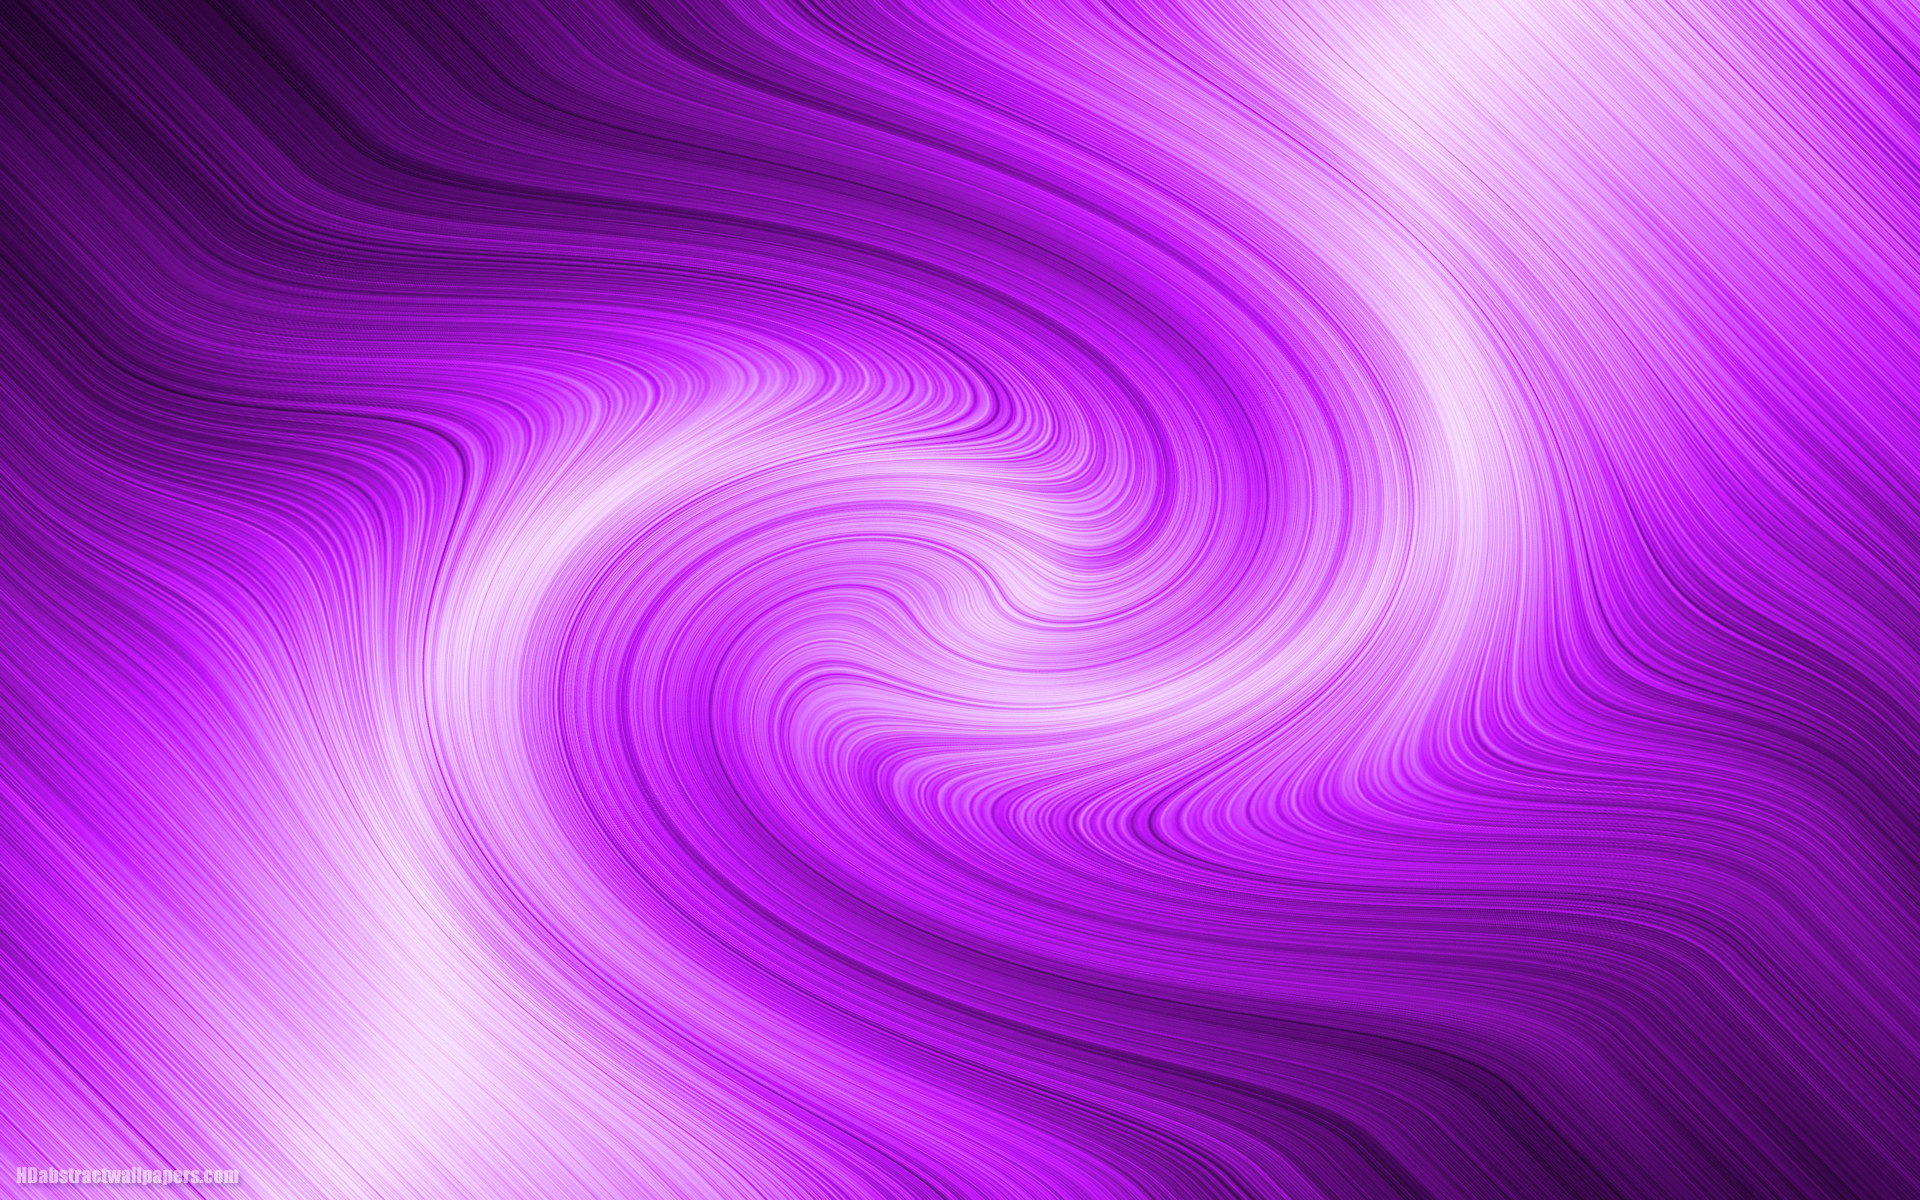 1920x1200 ... Fine HD Wallpapers Collection of Abstract Purple - ,  19/10/2013 ...